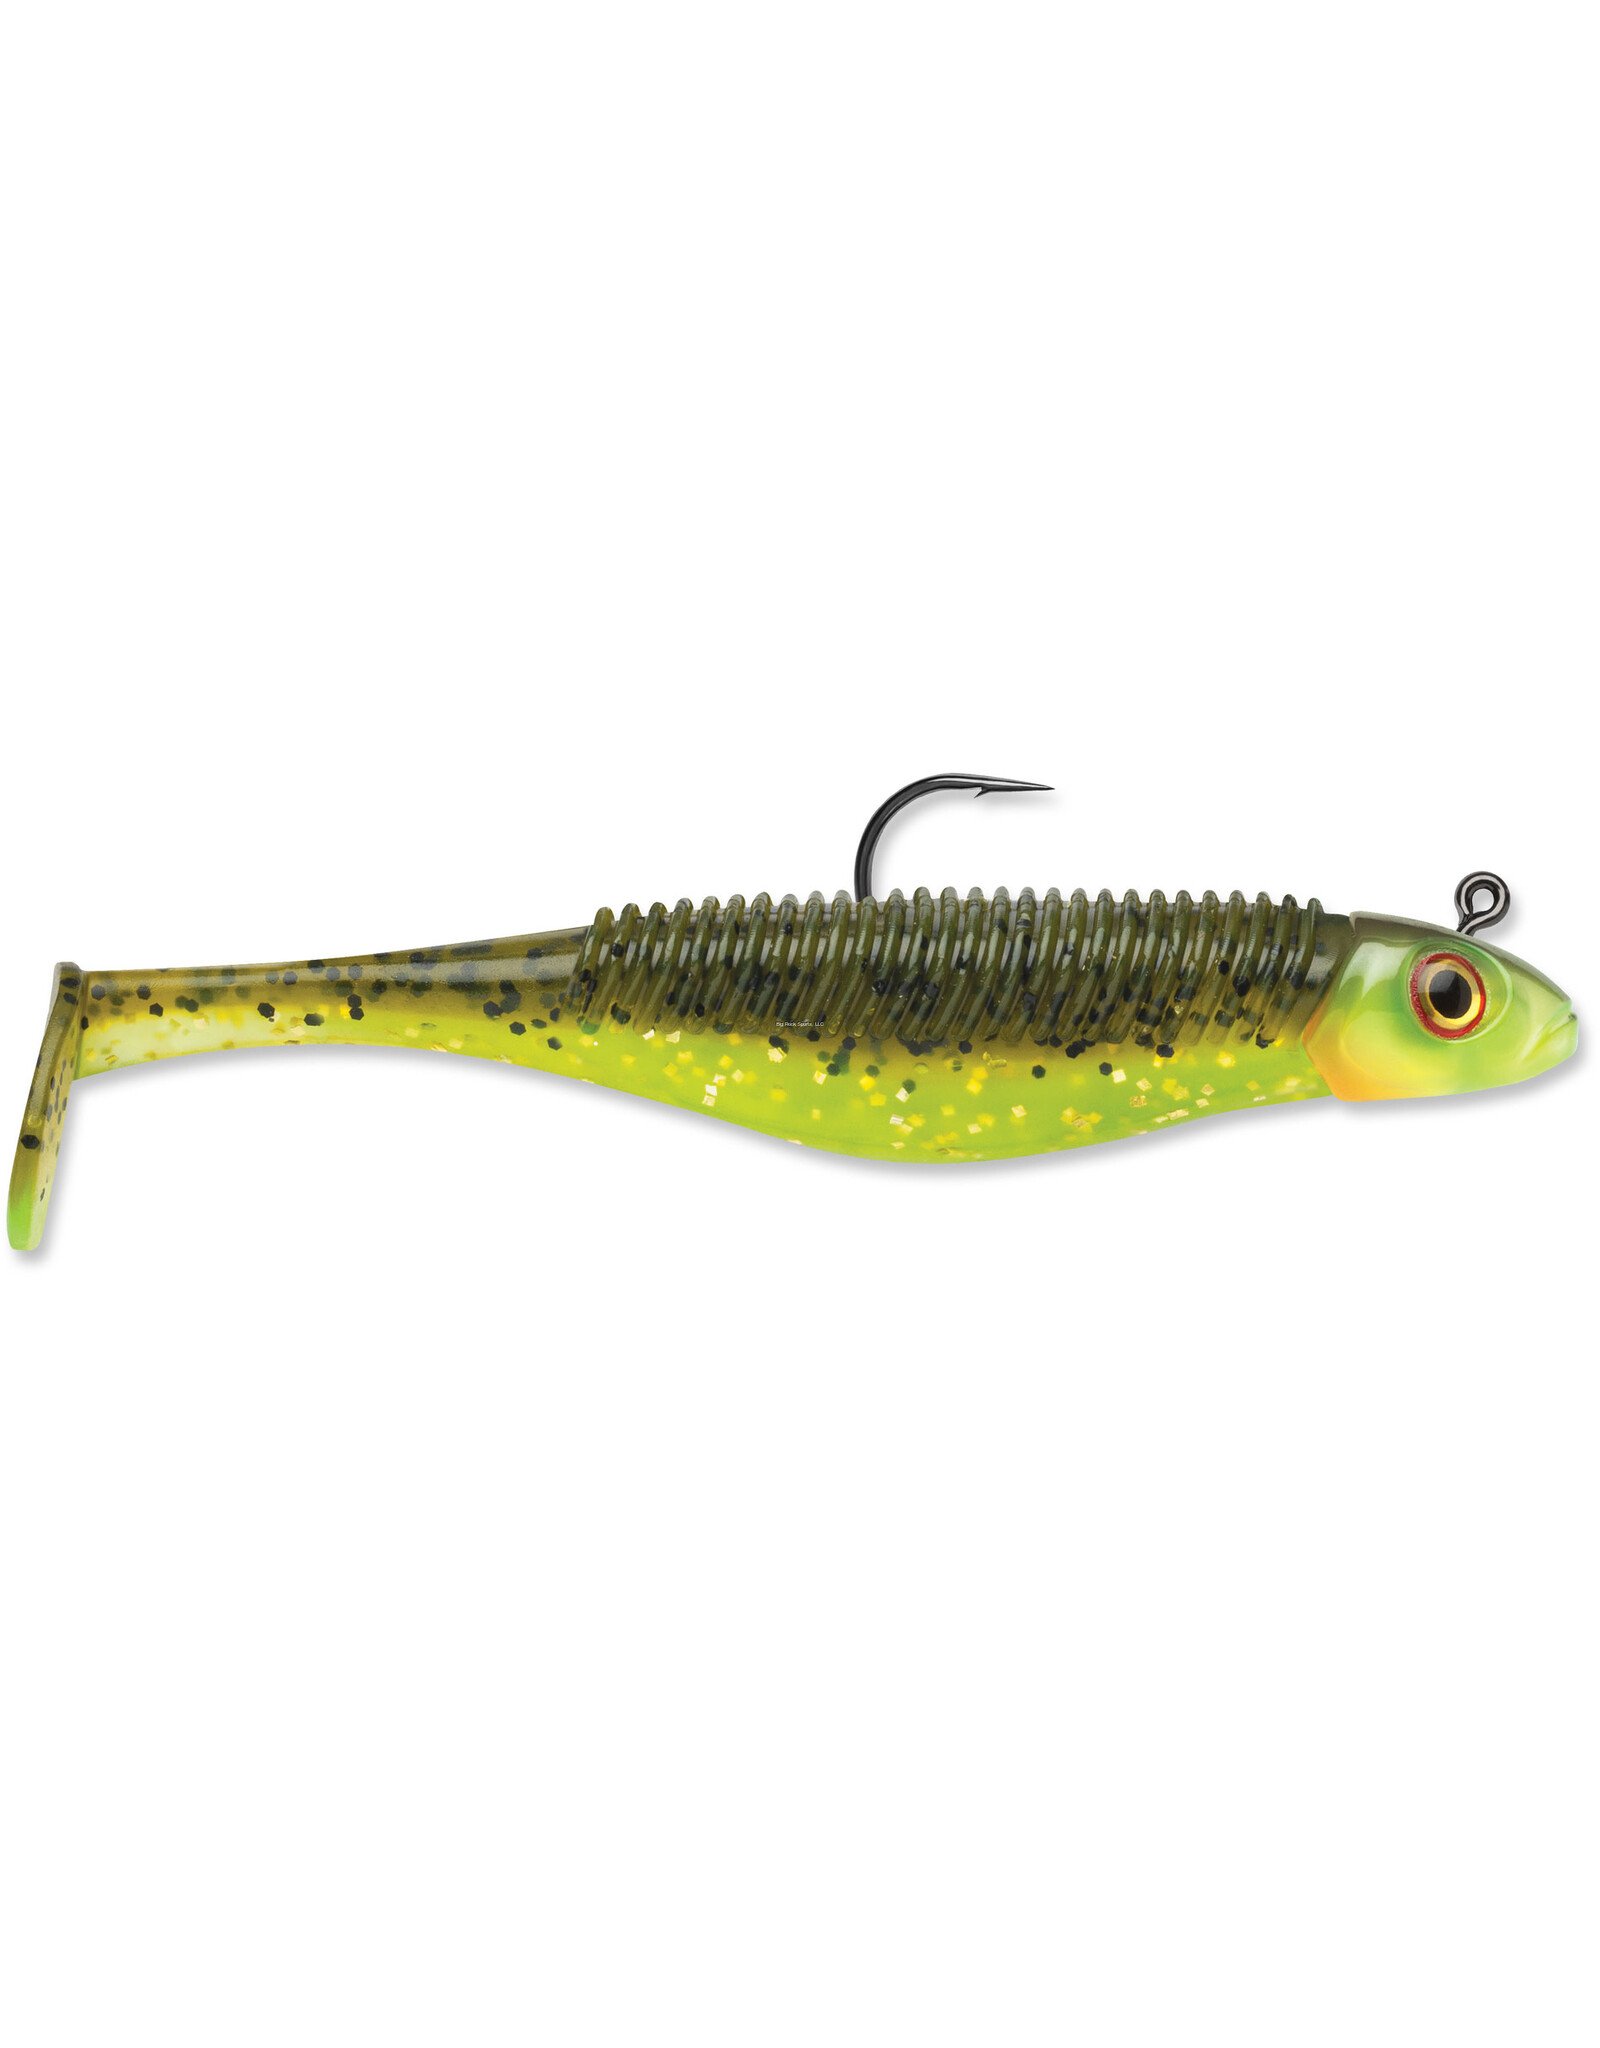 Storm Storm SBD45HO-38J 360GT Searchbait Shad, Sinking, 4-1/2", 3/8oz, #4/0 Hk, 1 Rigged Two Bodies, Hot Olive